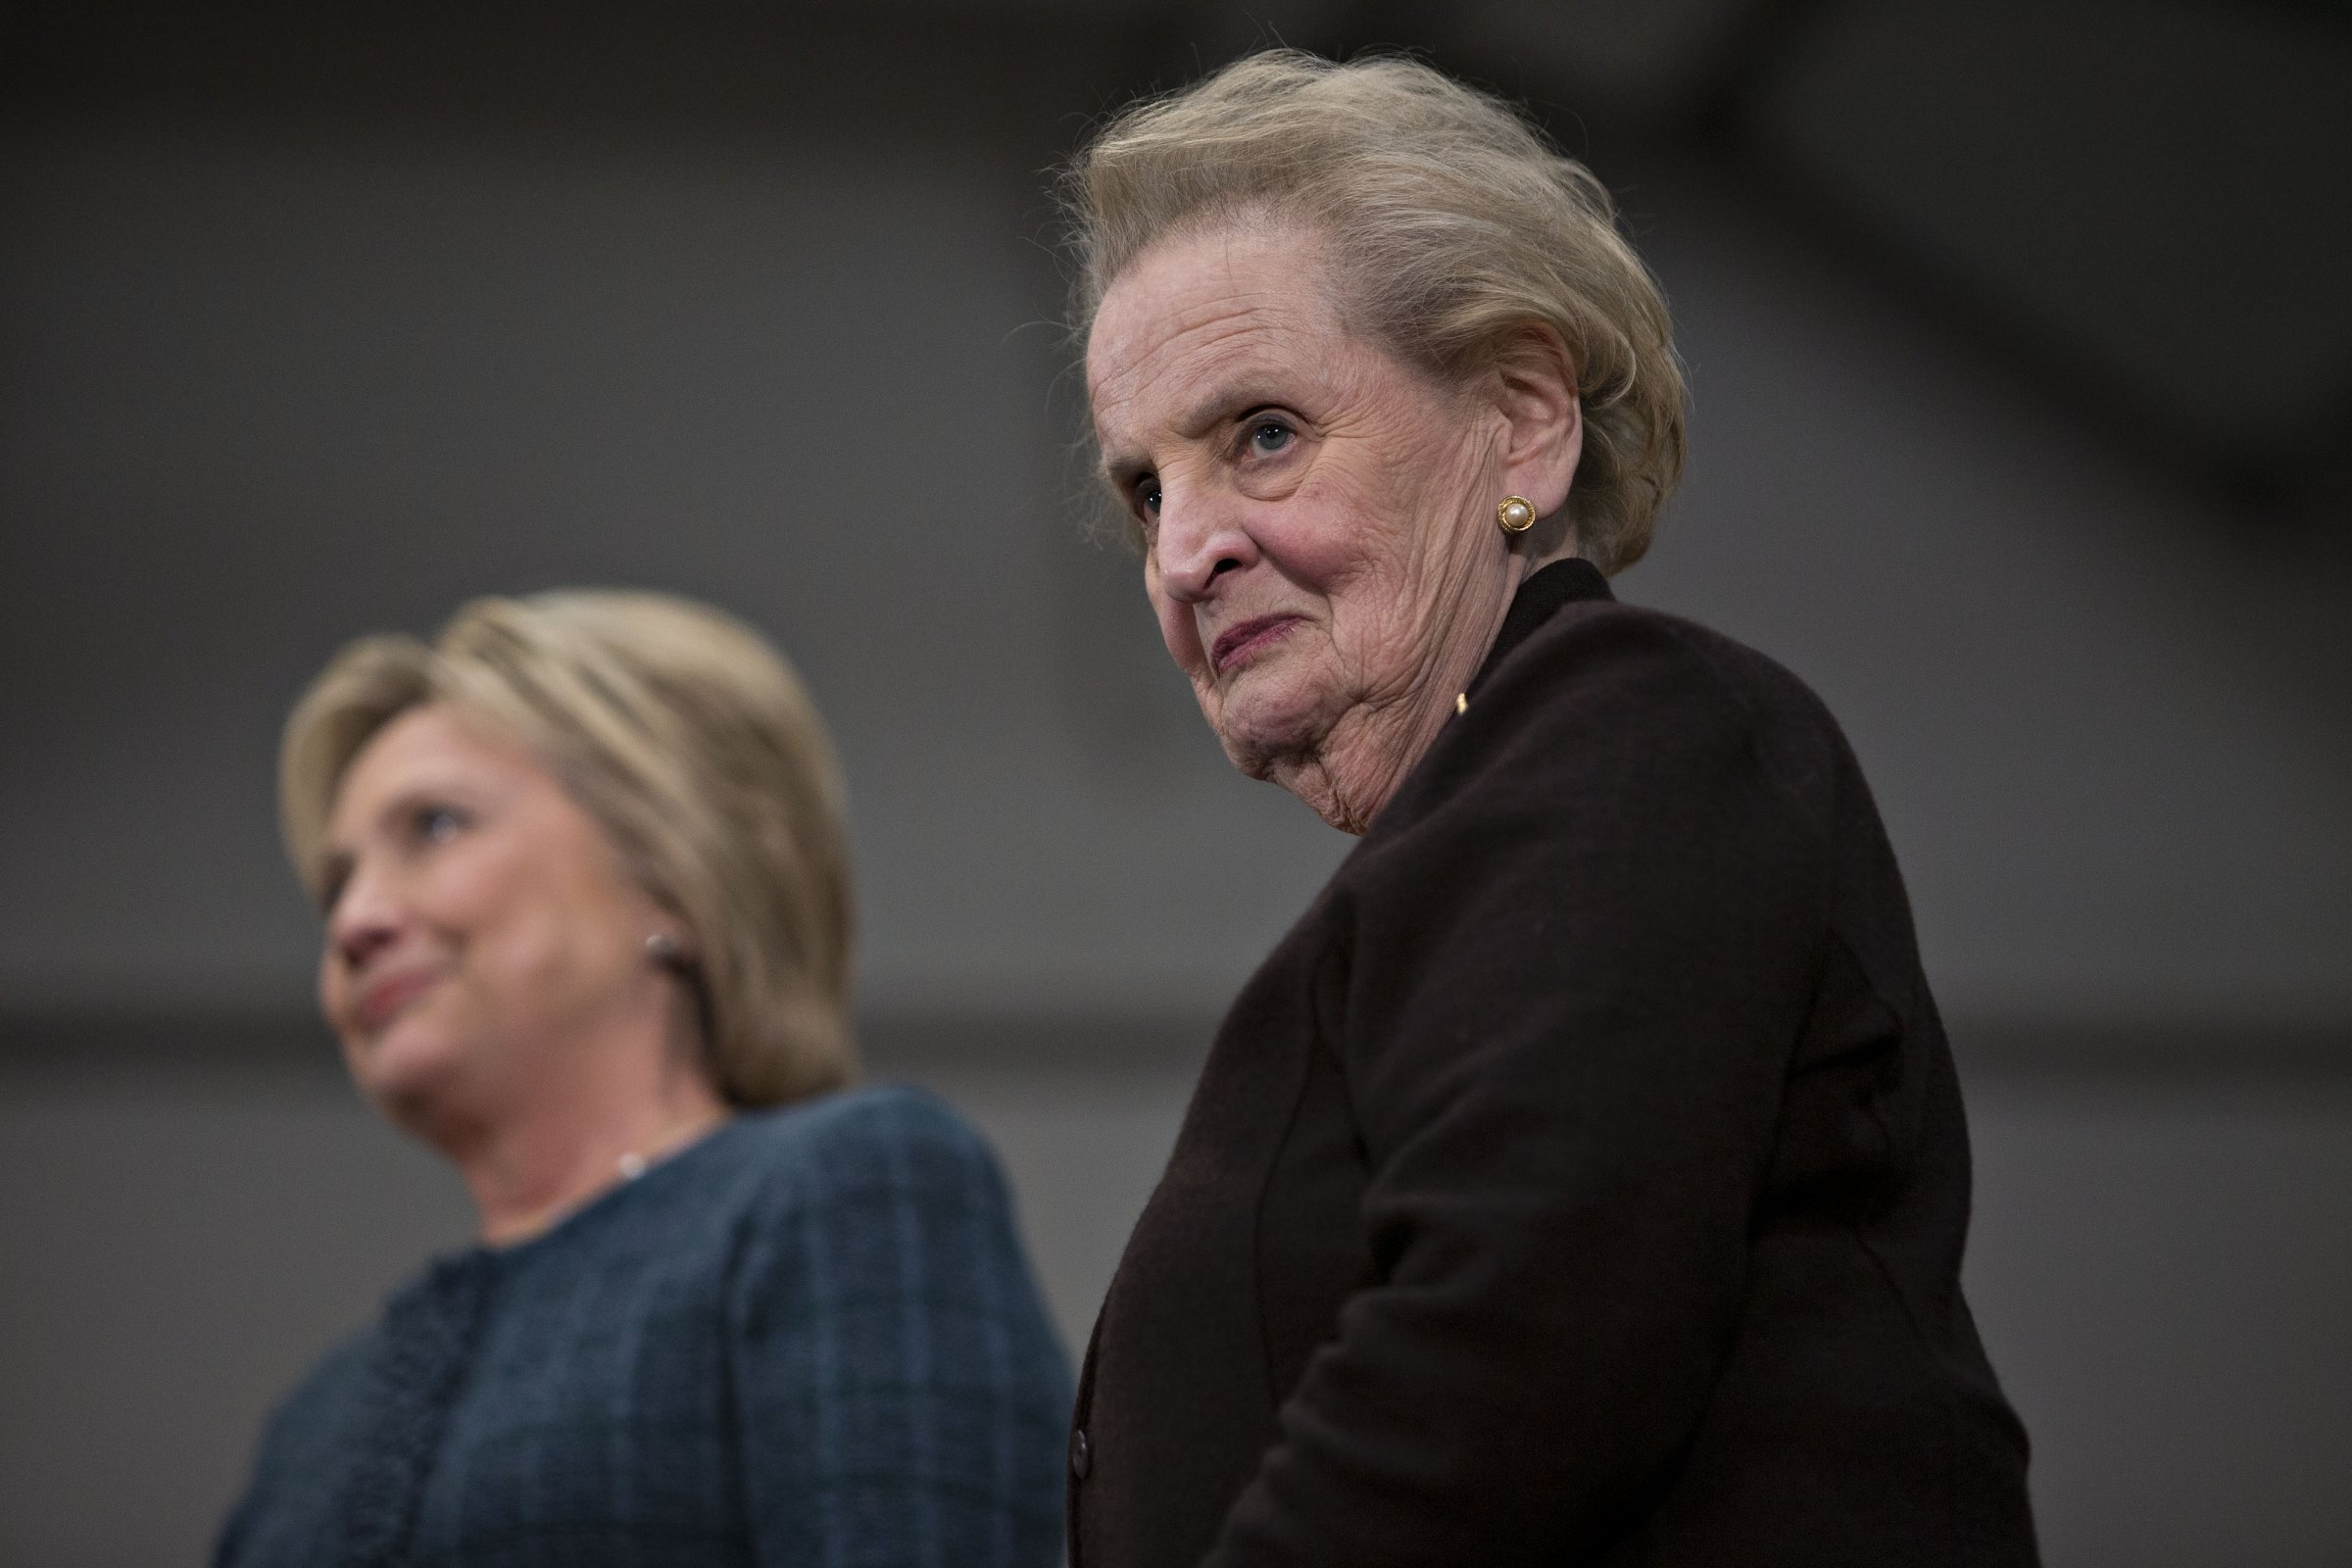 Madeleine Albright, right, joins Hilary Clinton, left, in Concord, N.H. on Feb. 6, 2016.